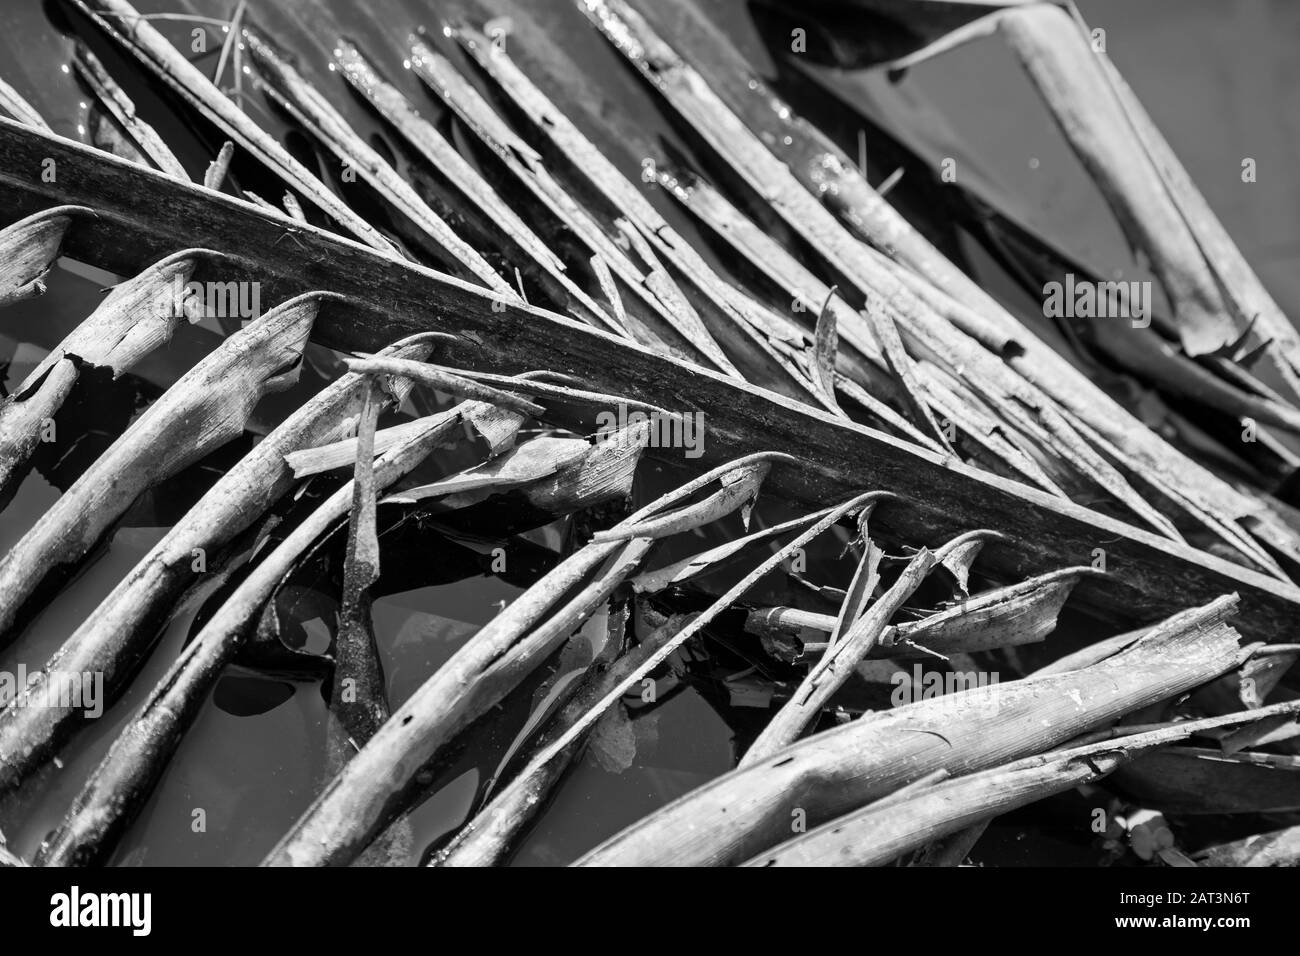 Indonesia, Bali, Tegalalang Rice Terraces, Fallen Coconut palm leaf in water (Detail) Stock Photo